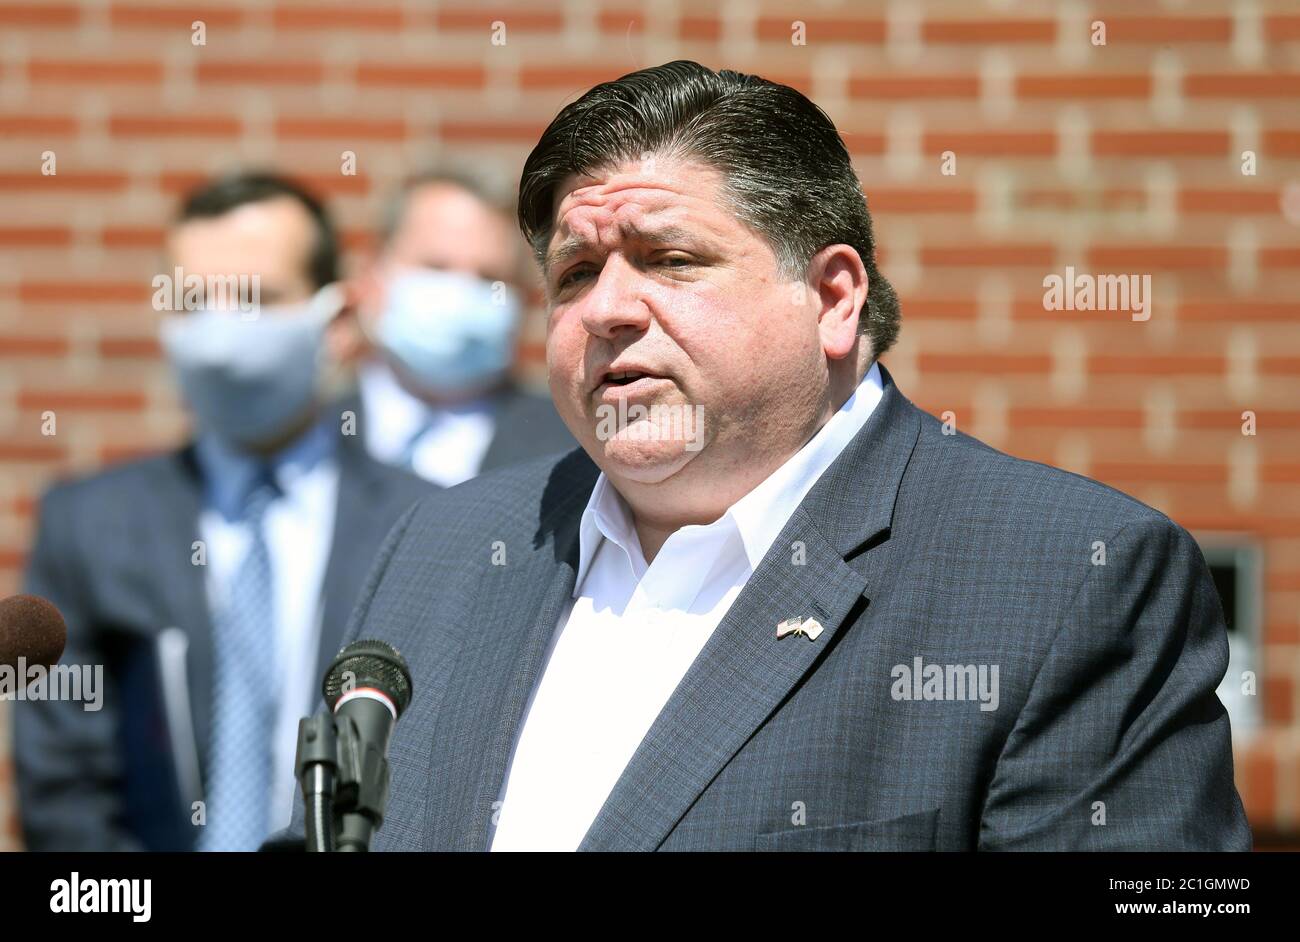 Belleville, United States. 15th June, 2020. Illinois Governor JB Pritzker announces $275 million in funding for the Low-Income Home Energy Assistance Program (LIHEAP) and Community Services Block Grant (CSBG) programs, while visiting Belleville, Illinois on Monday, June 15, 2020. Effective immediately, eligible Illinois residents and families can apply to receive assistance with food, rent, utilities, temporary shelter, medicine and other essential household services impacted by COVID-19. Photo by Bill Greenblatt/UPI Credit: UPI/Alamy Live News Stock Photo